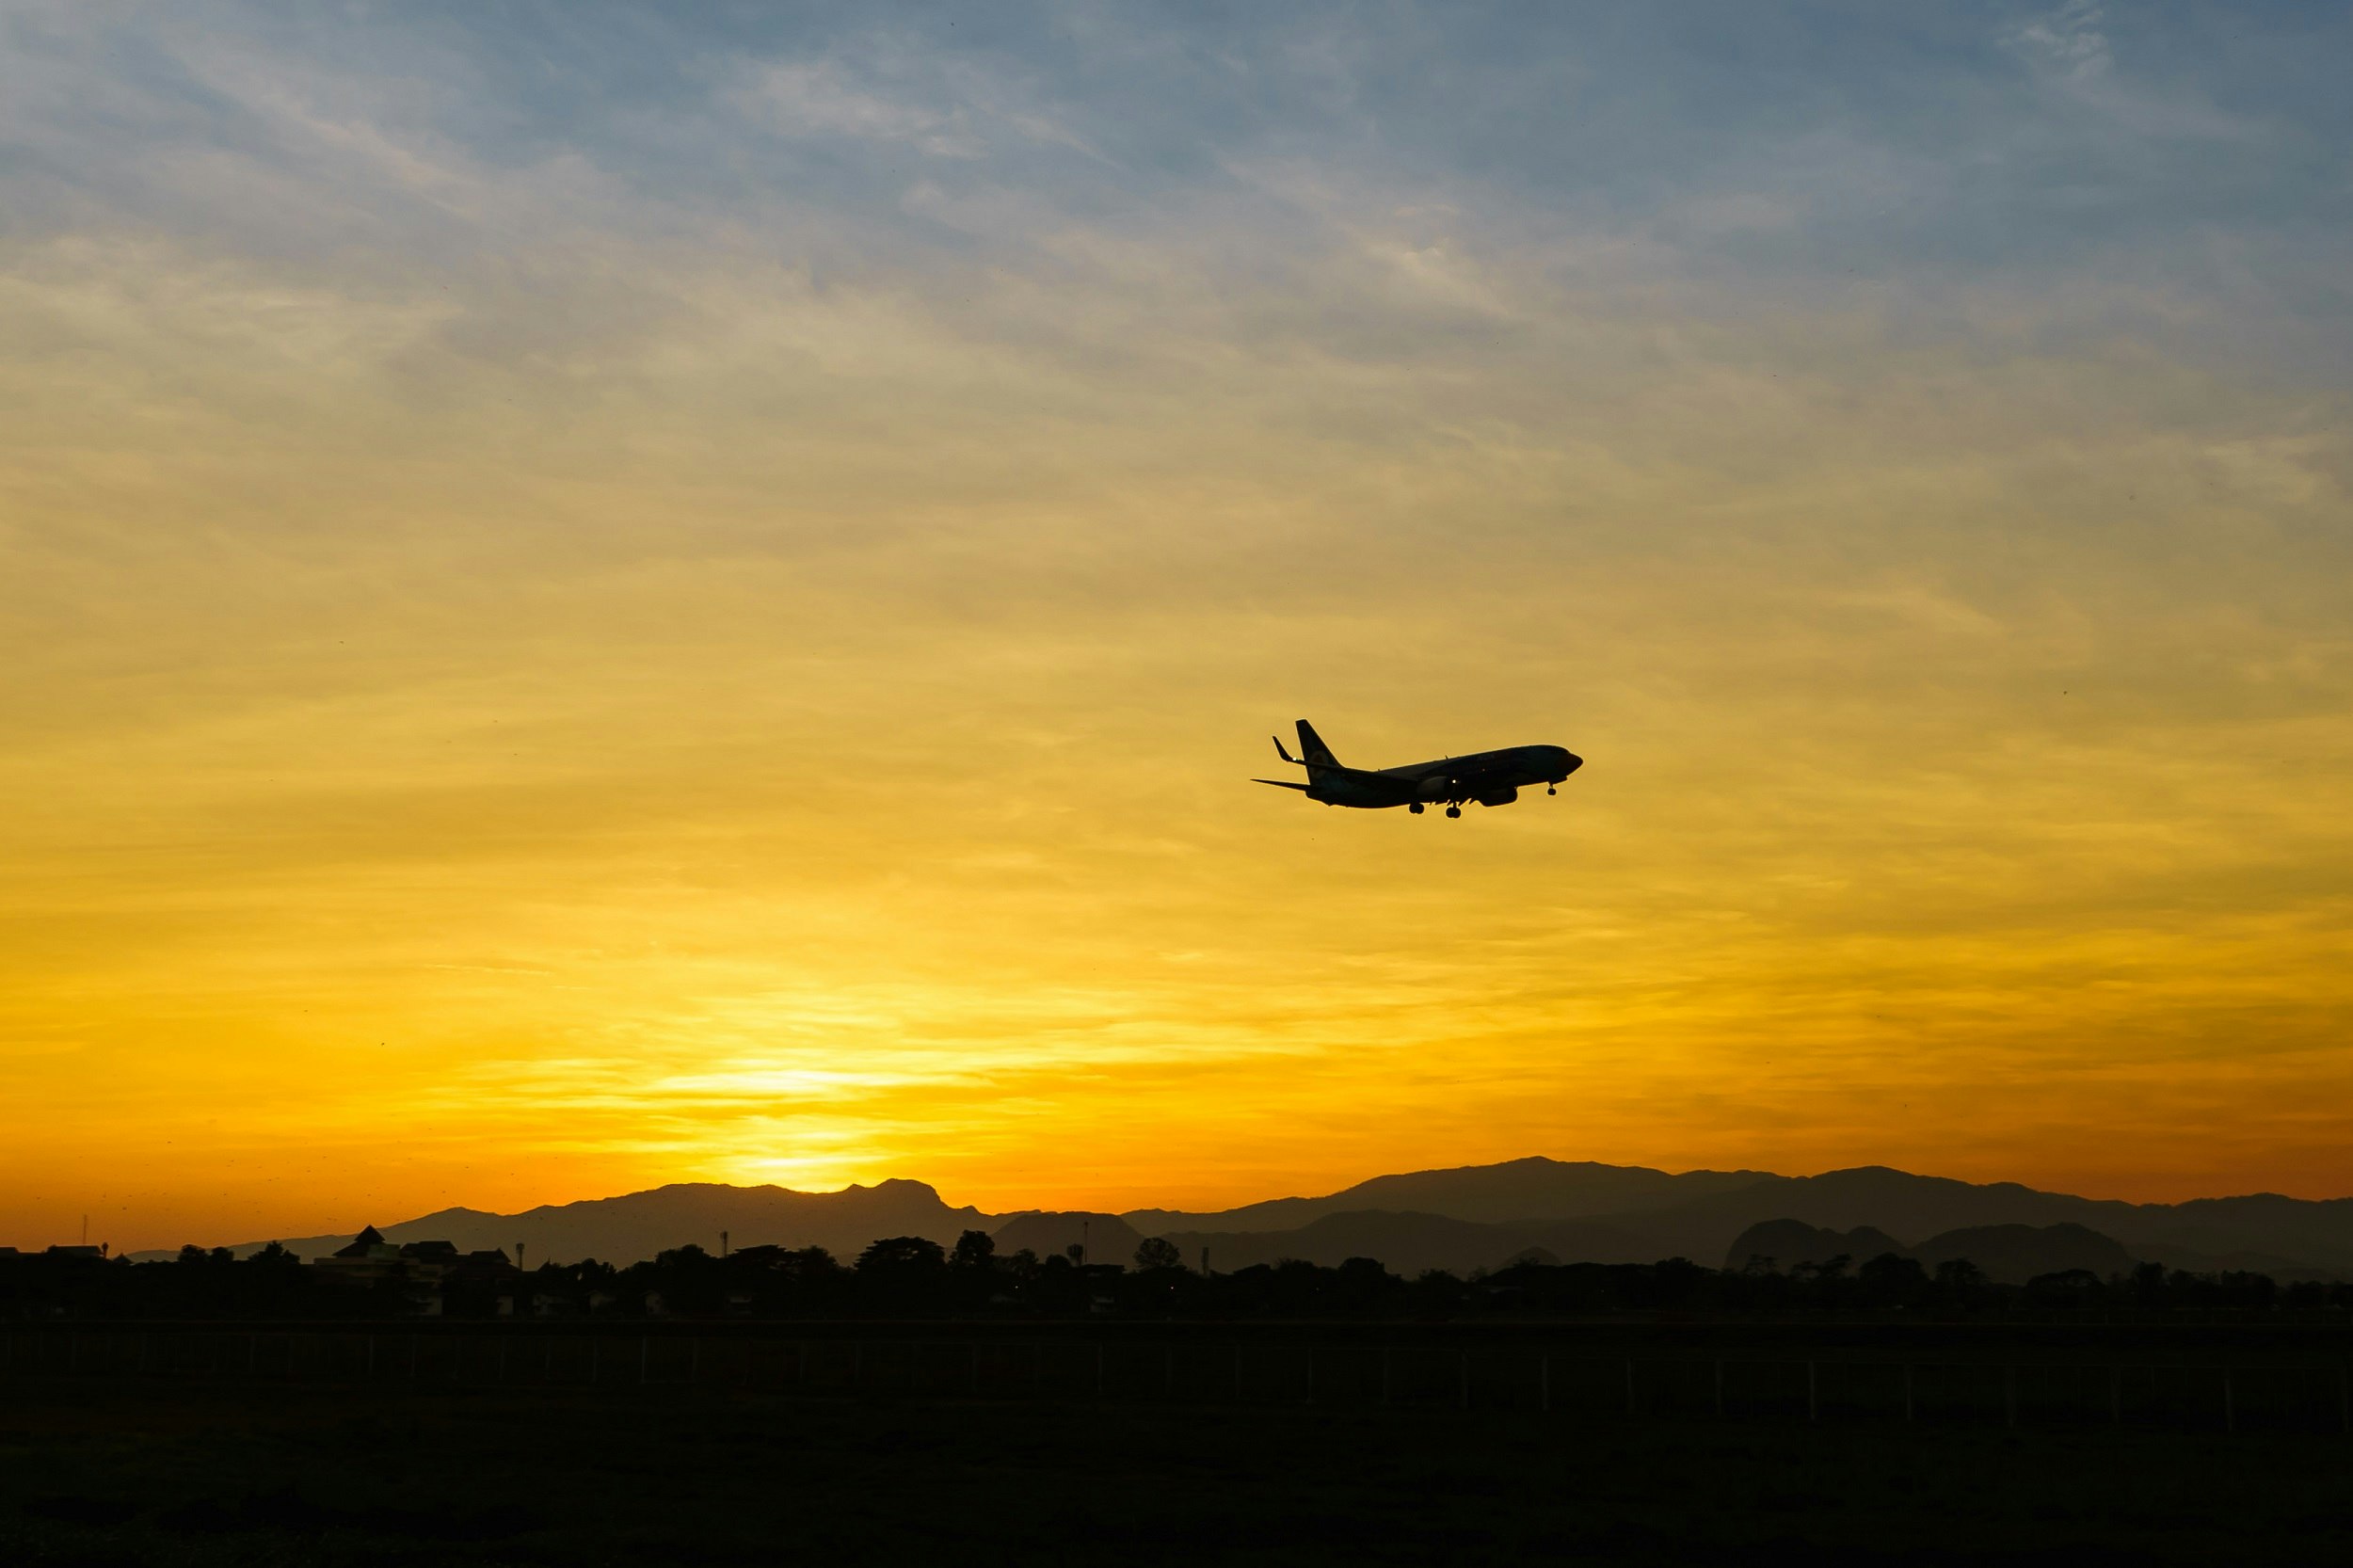 A plane is silhouetted against the sunset, with hills in the background